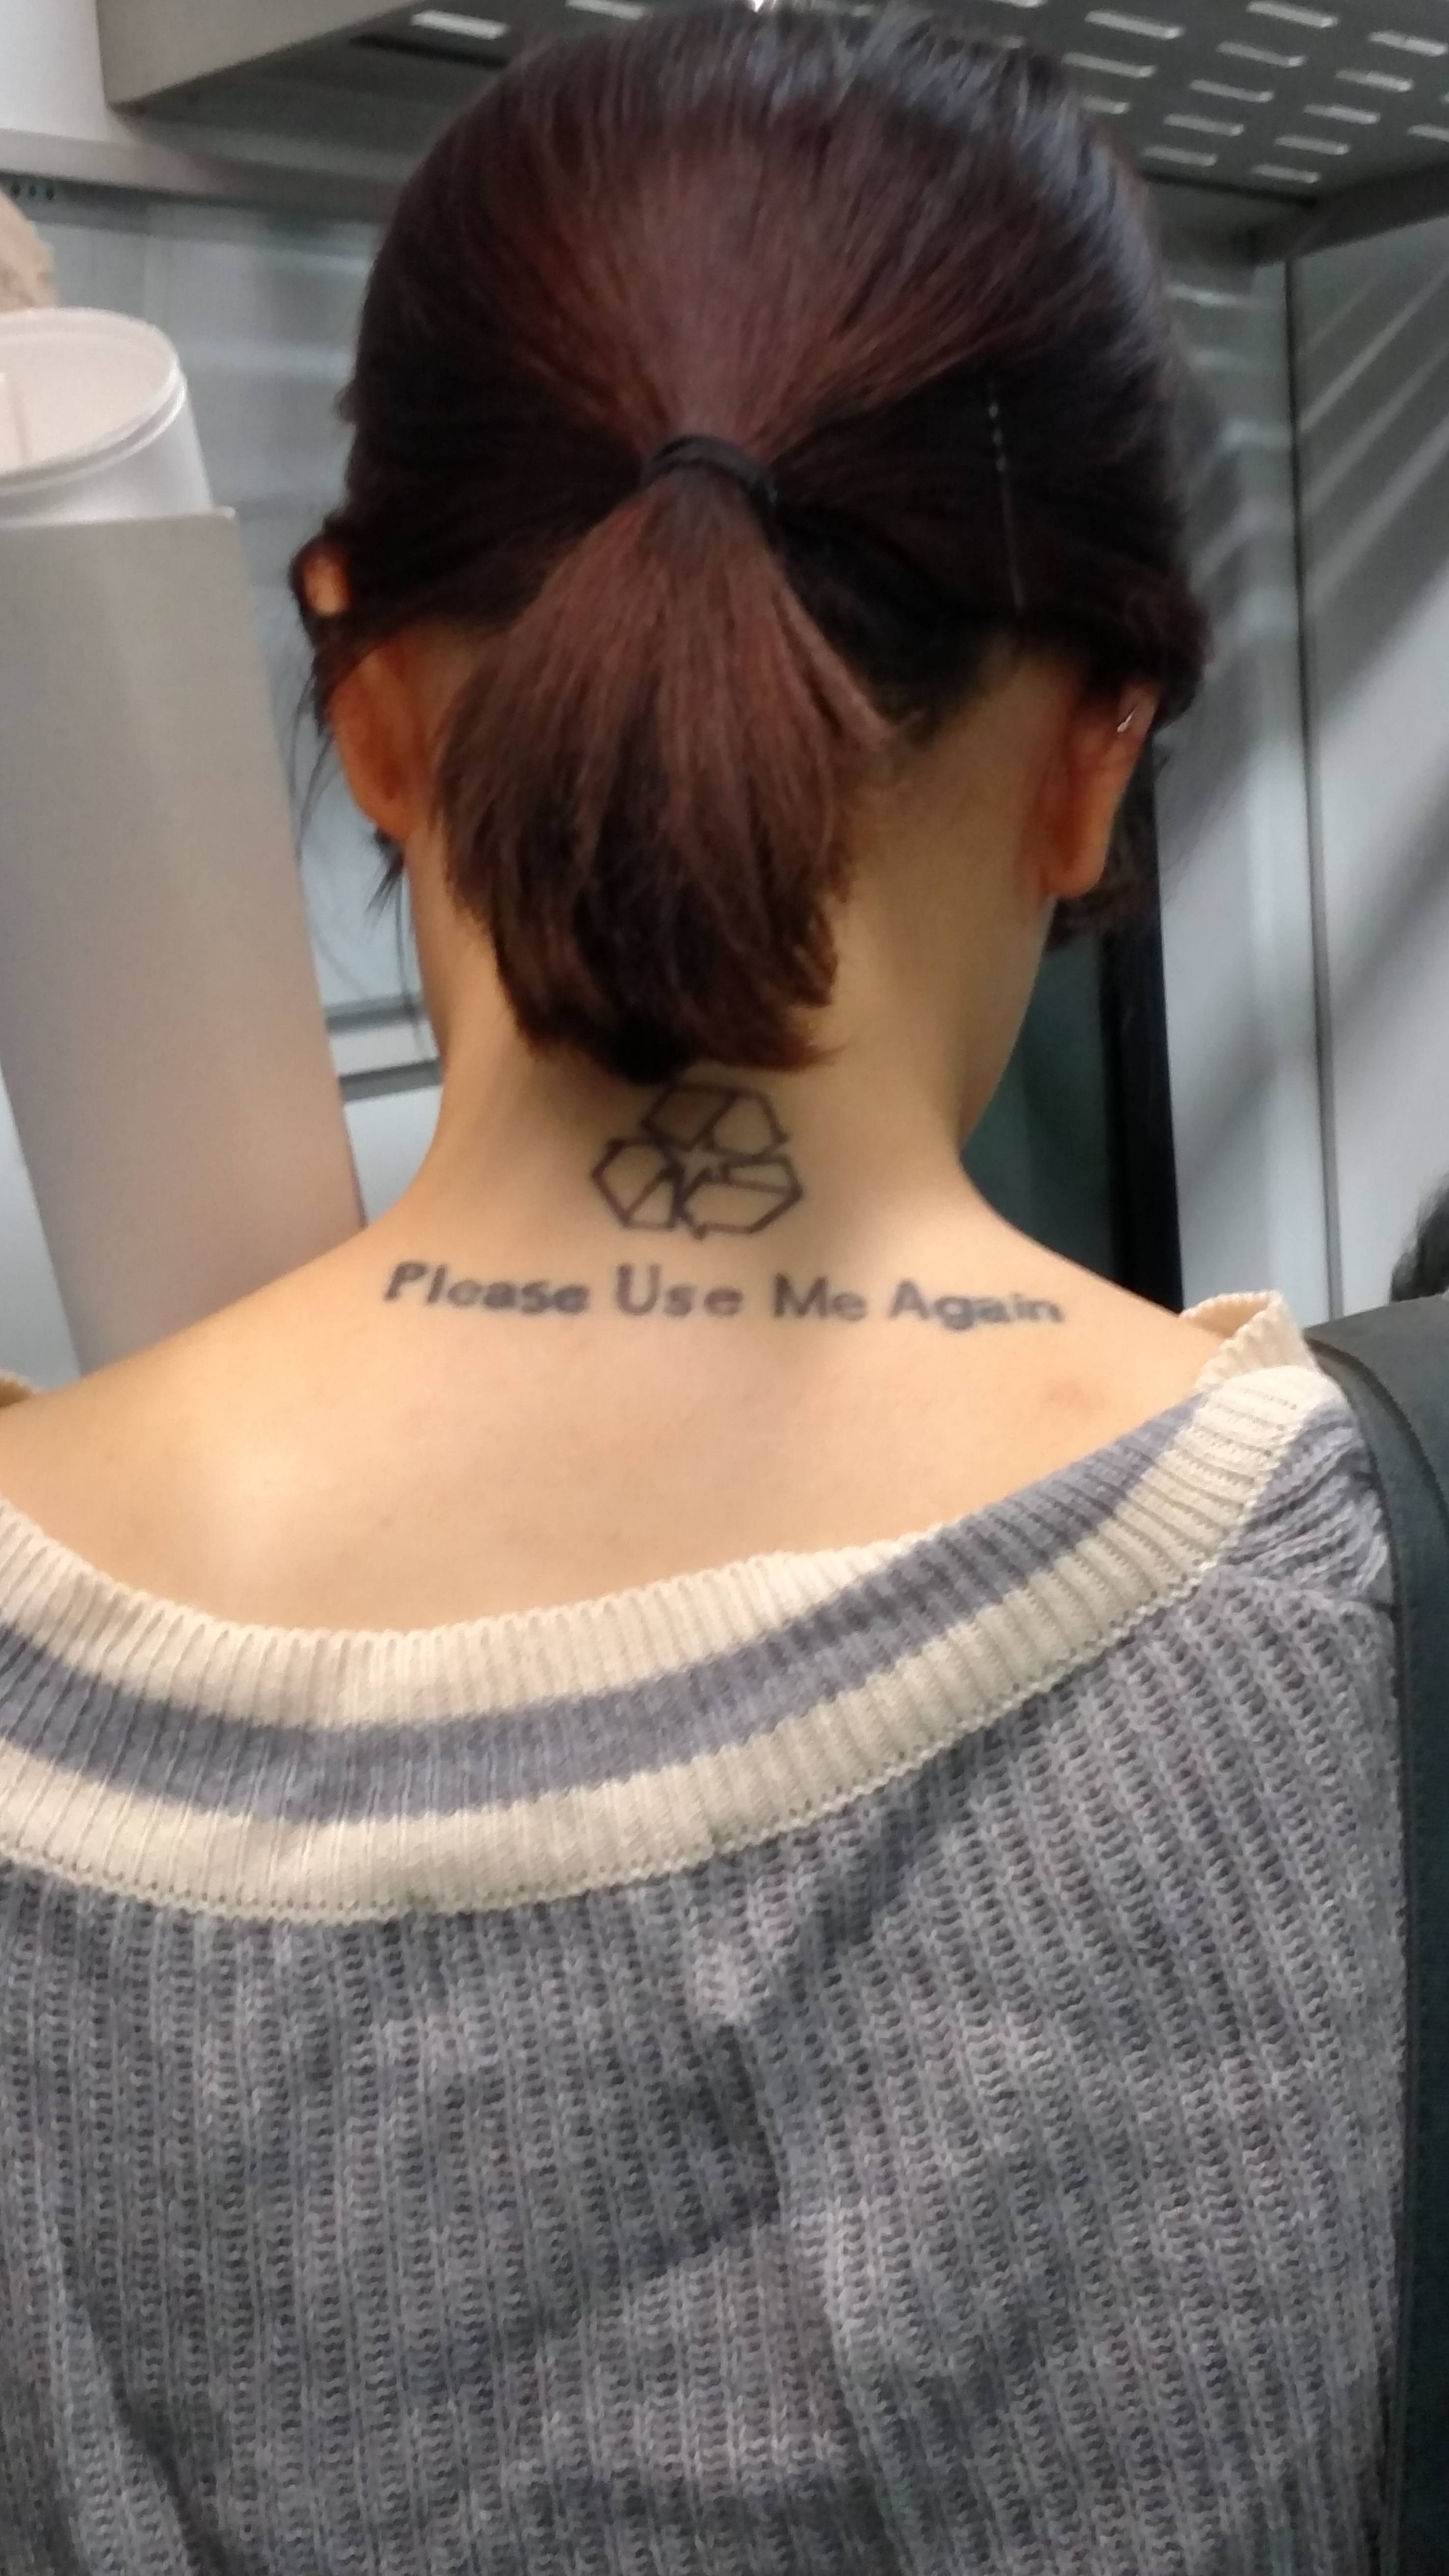 Girl with tattoo on the back of her neck that has recycled logo and says please use me again